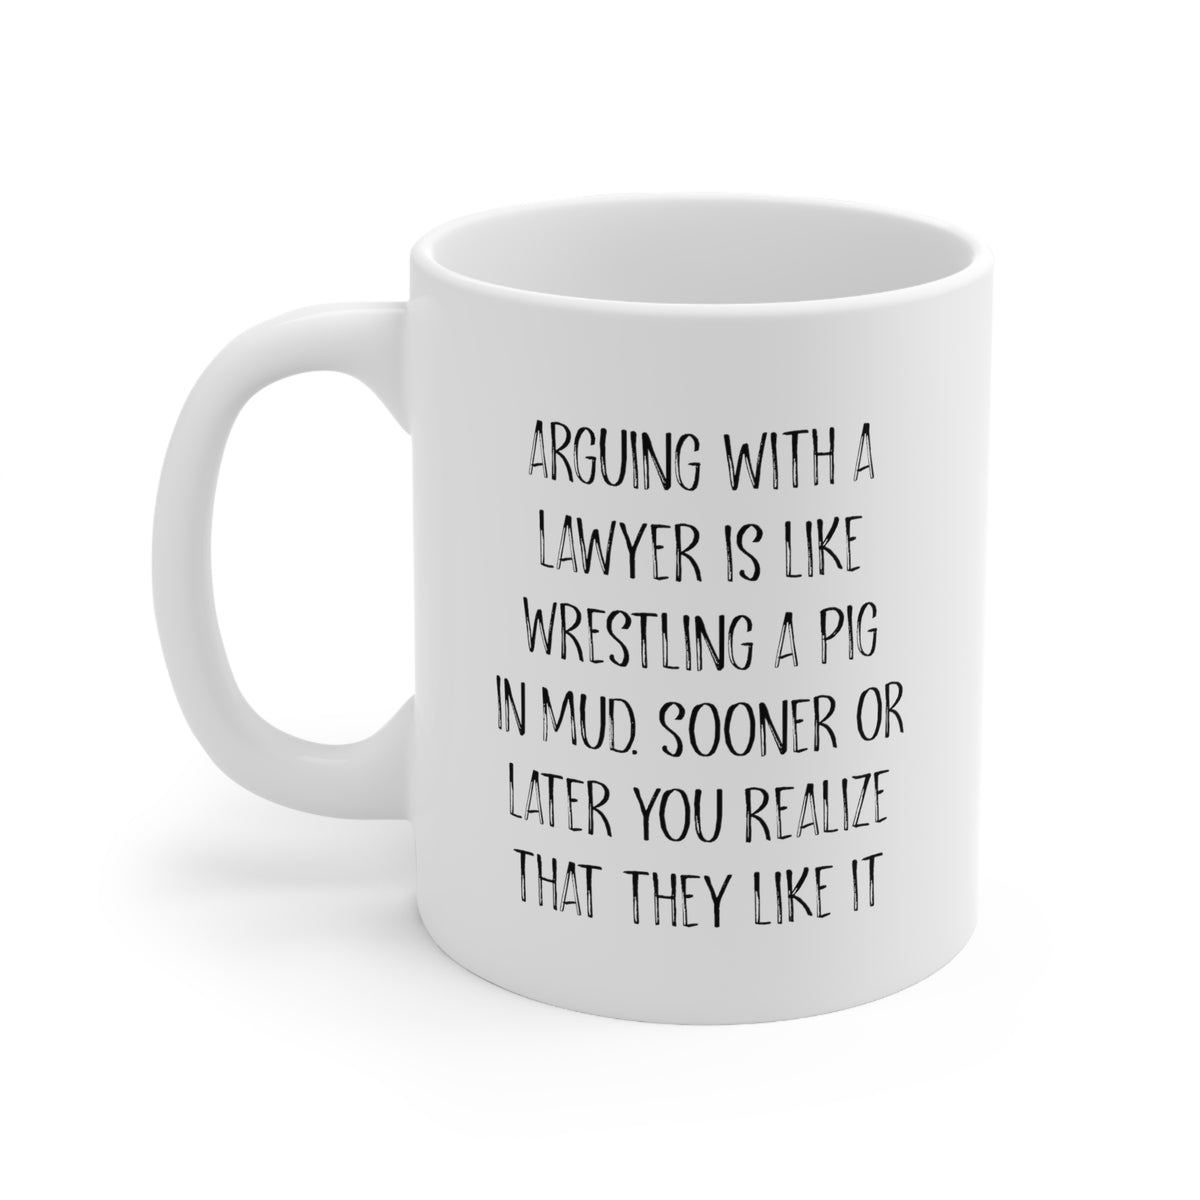 Arguing With A Lawyer Is Like Wrestling A Pig In Mud. Sooner Or Later You Realize That They Like It – Funny Coffee Mug For Lawyer